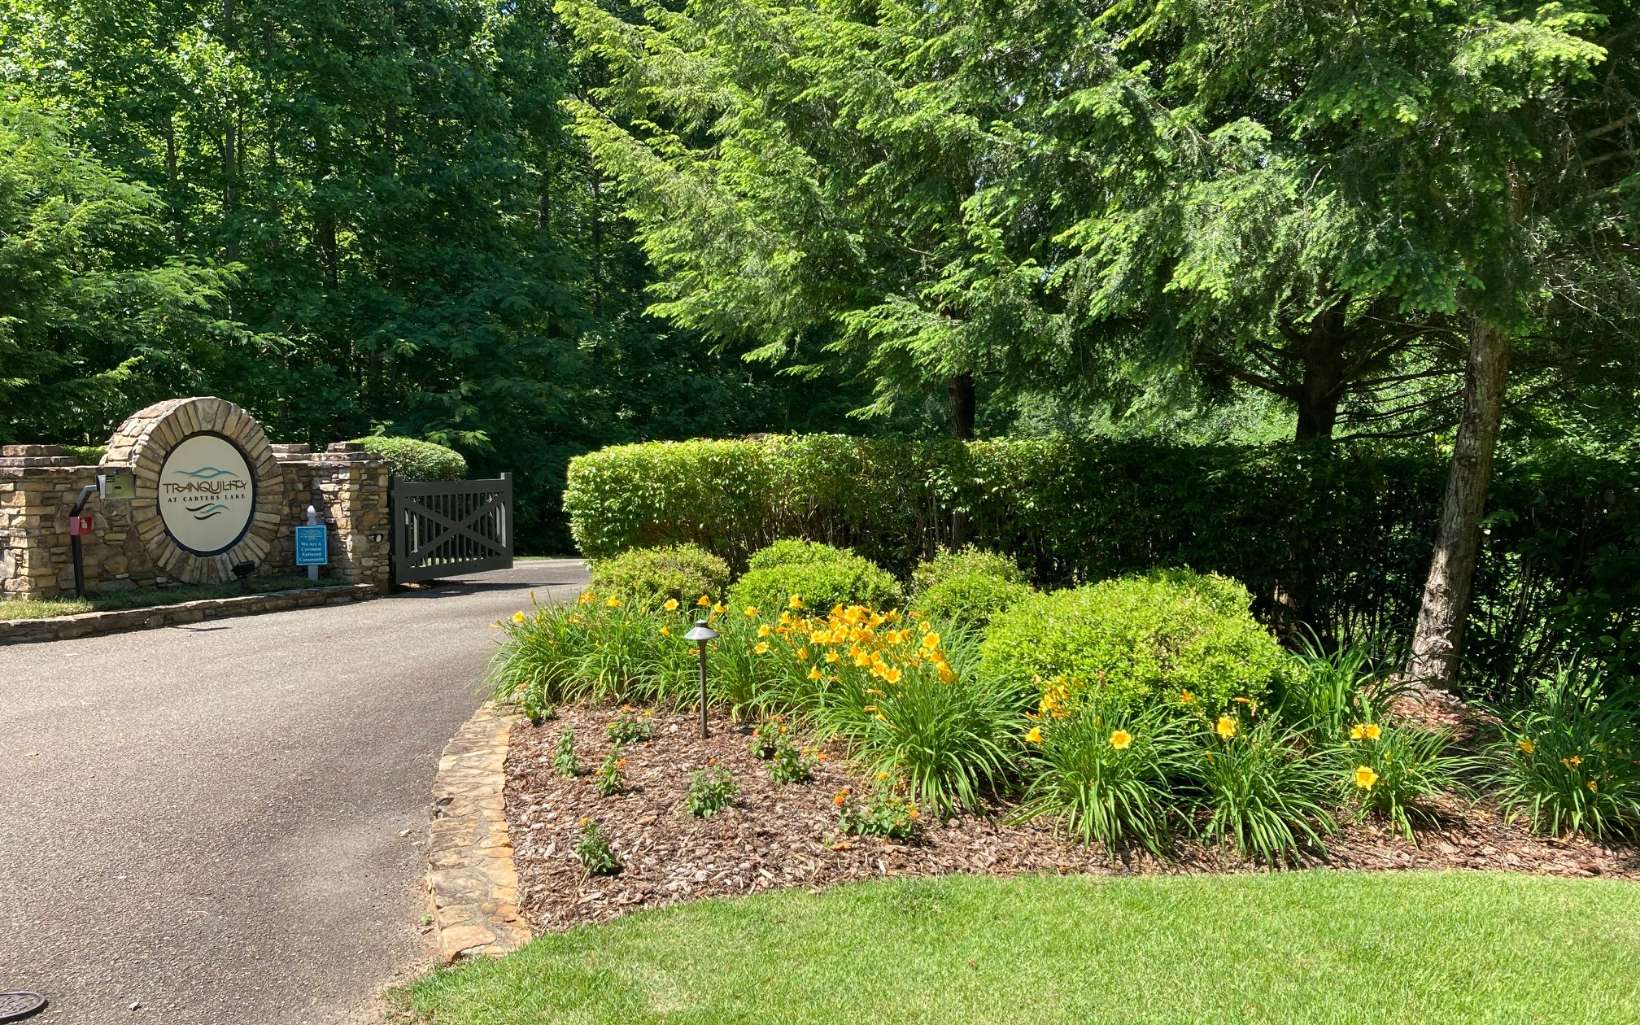 Beautiful wooded lot in gated community of Tranquility at Carters Lake. Gentle terrain has multiple building sites with plenty of greenery for privacy! Take advantage of all the amenities including creekside swings, parks, trails, and craftsman pavilion! Very close proximity to boat ramp and lake access.